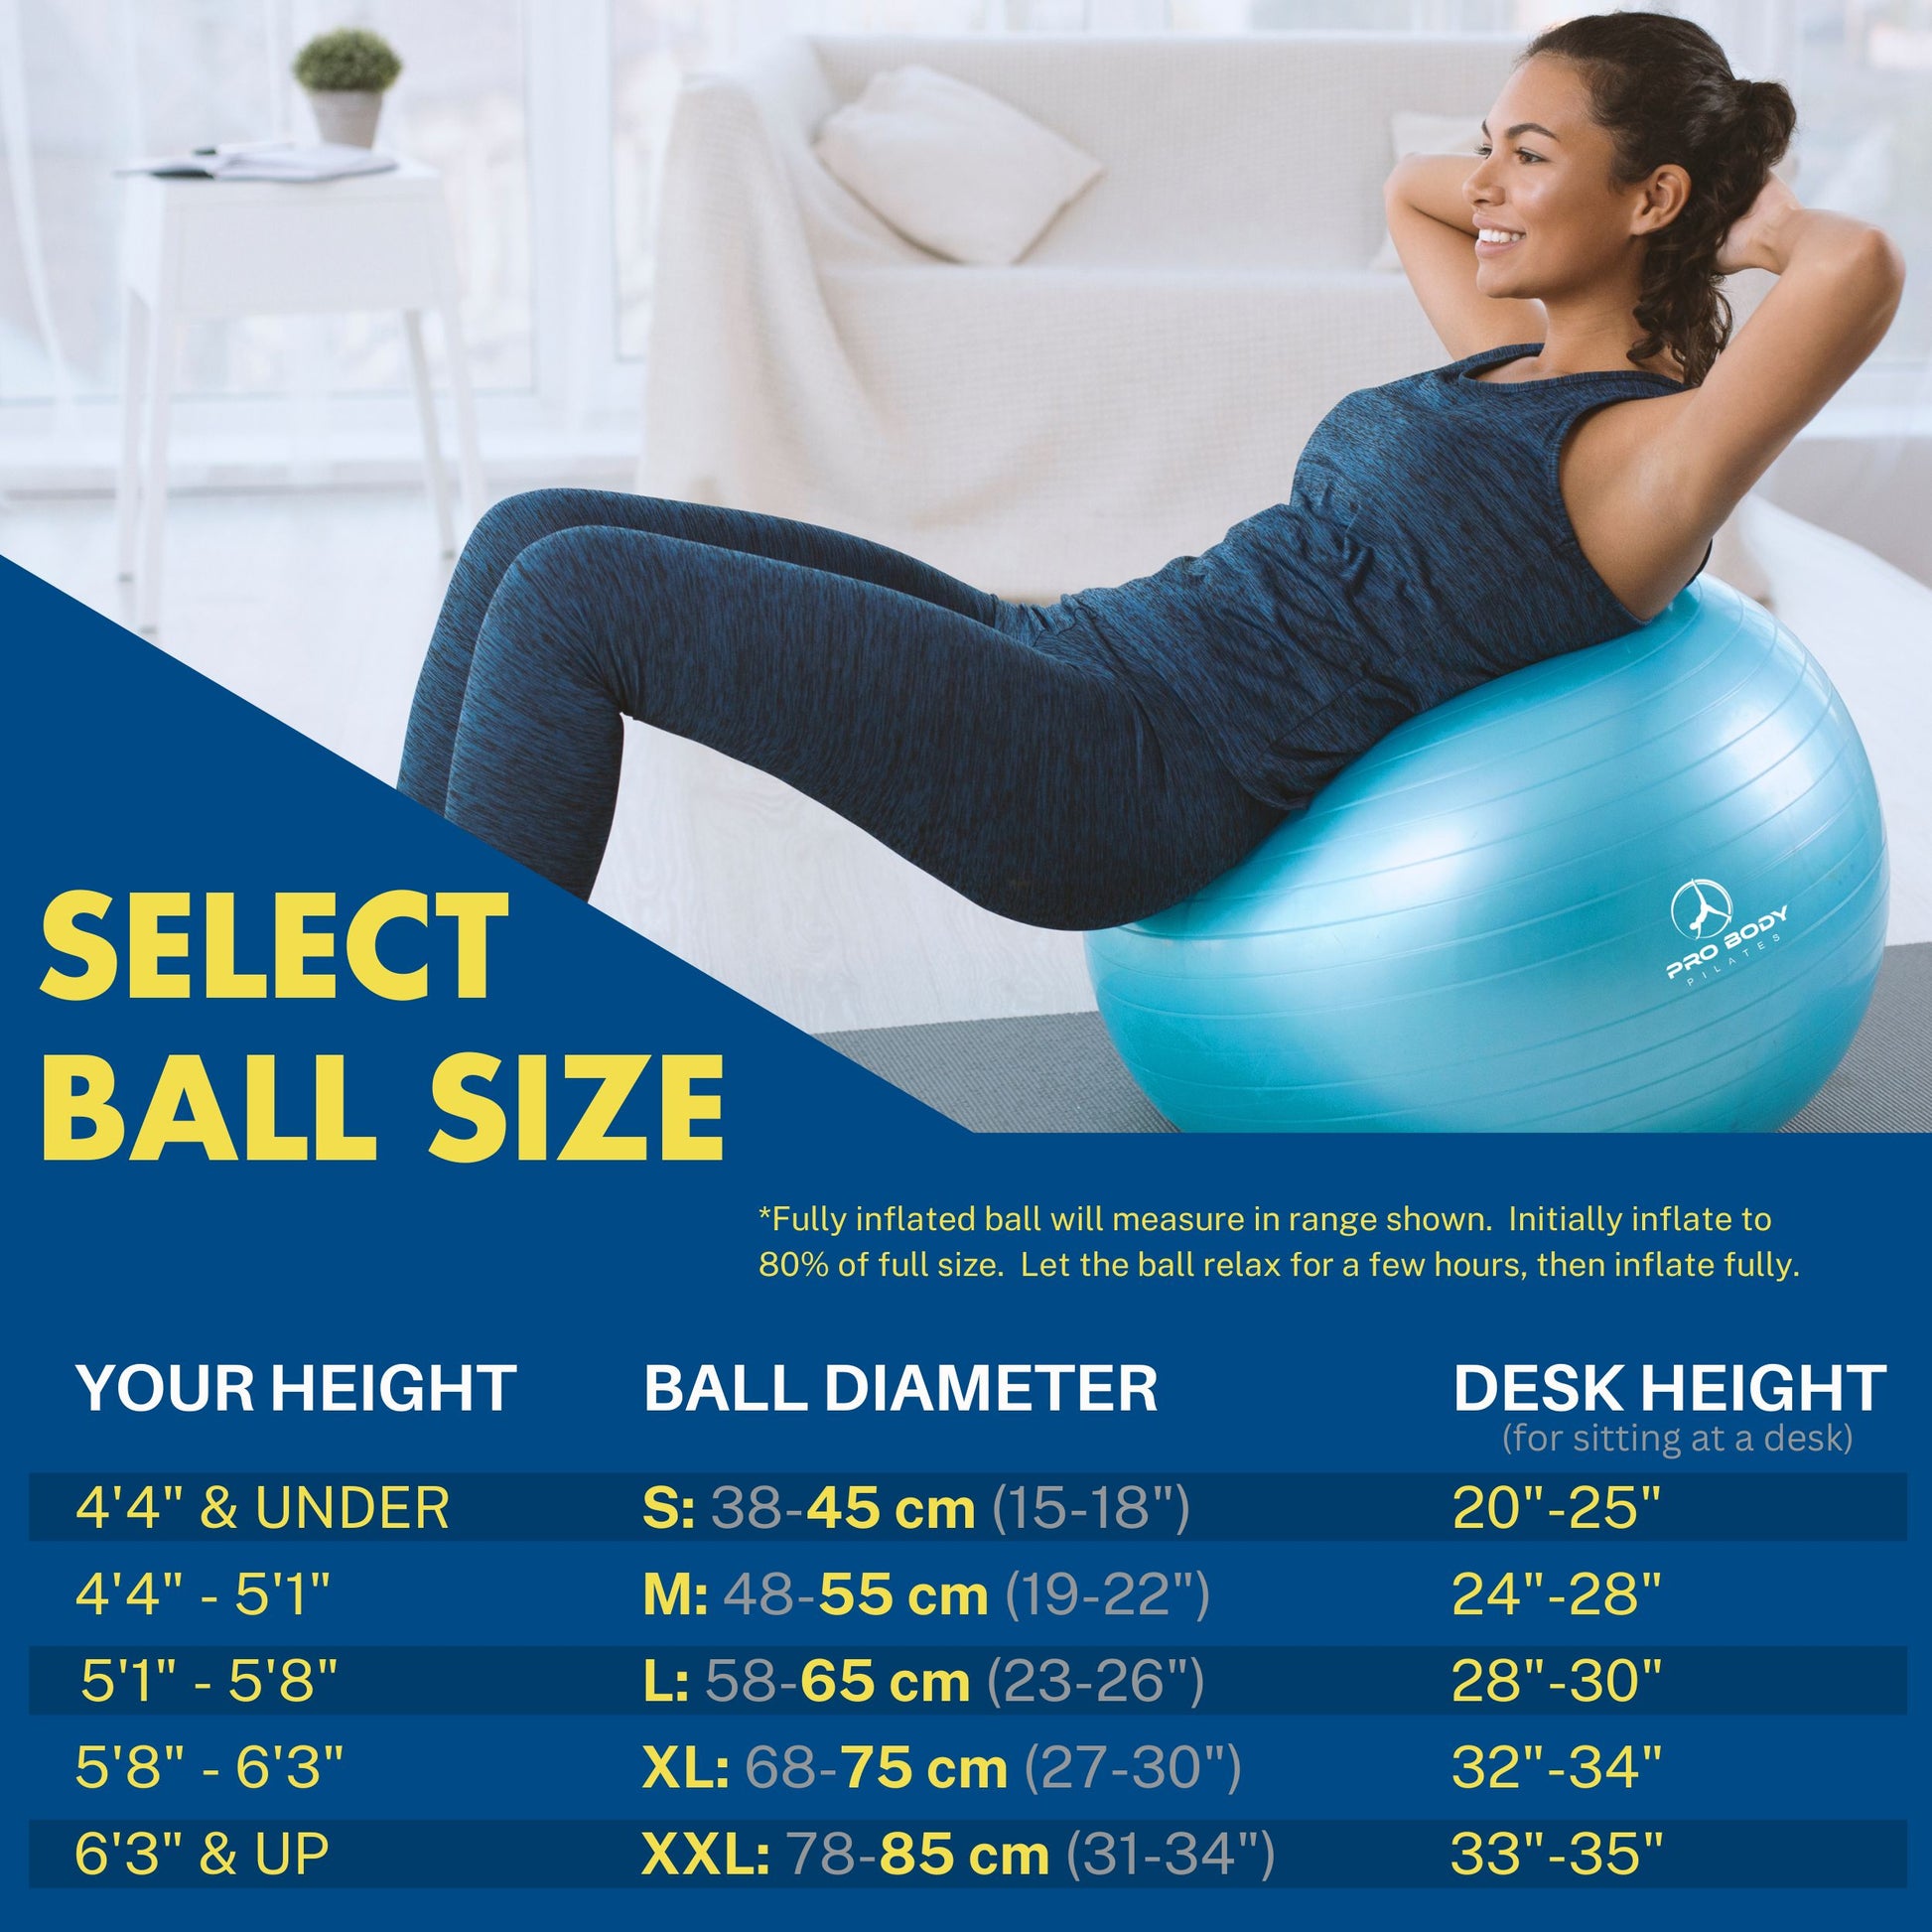  𝗘𝘅𝗲𝗿𝗰𝗶𝘀𝗲 𝗕𝗮𝗹𝗹 for Working Out 65 cm-Yoga Ball Chair  & Balance Ball for Pregnancy, Birthing Physical Therapy & Chair for Office  - Stability Ball & Stainless Steel Pilates Bar for Workout 